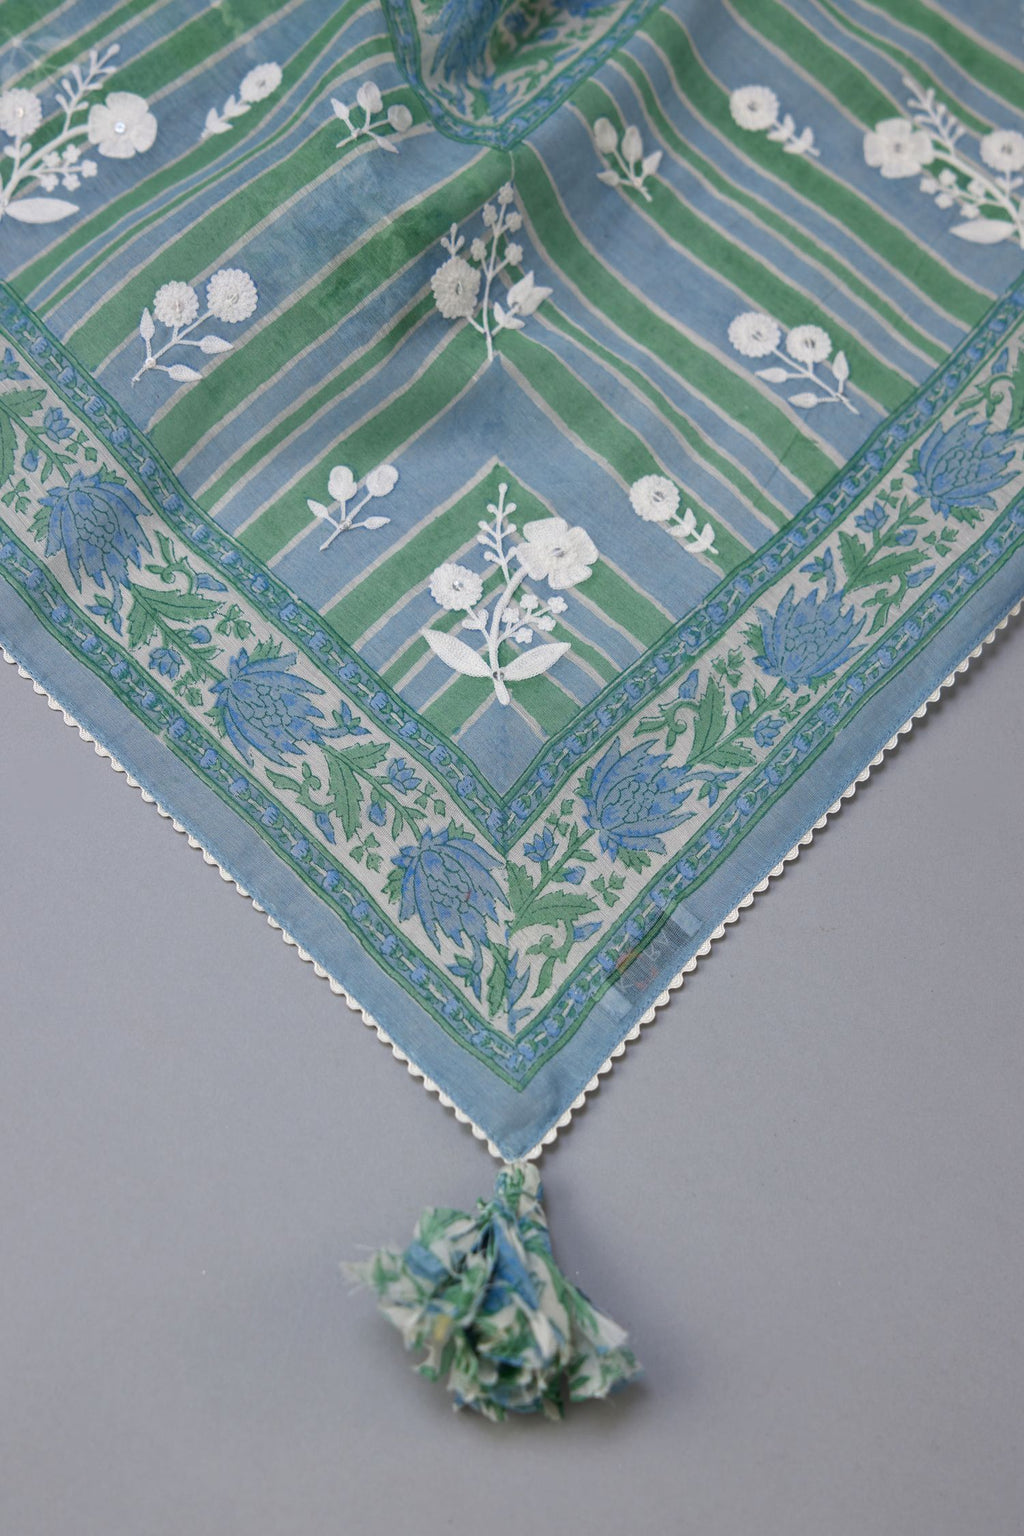 Blue & green hand block printed dupatta with all over assorted flower embroidery, finished with ric rac lace.